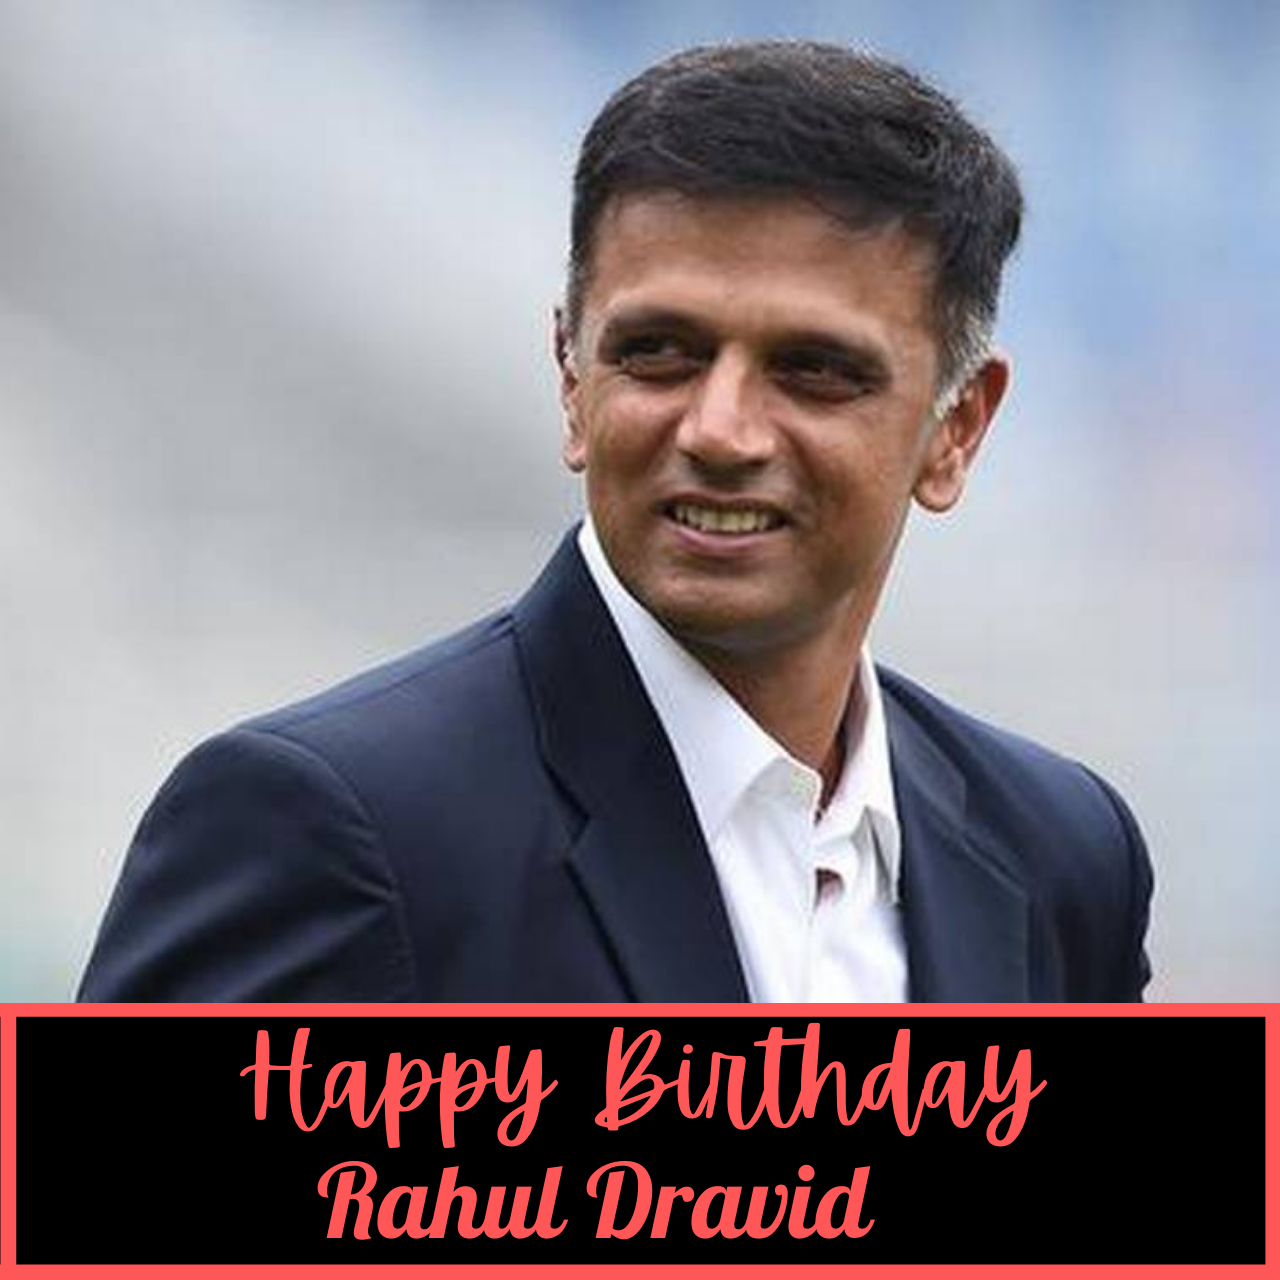 Happy Birthday Rahul Dravid Wishes, HD Images, Quotes, Tweets, and WhatsApp Status Videos to greet "The Wall"